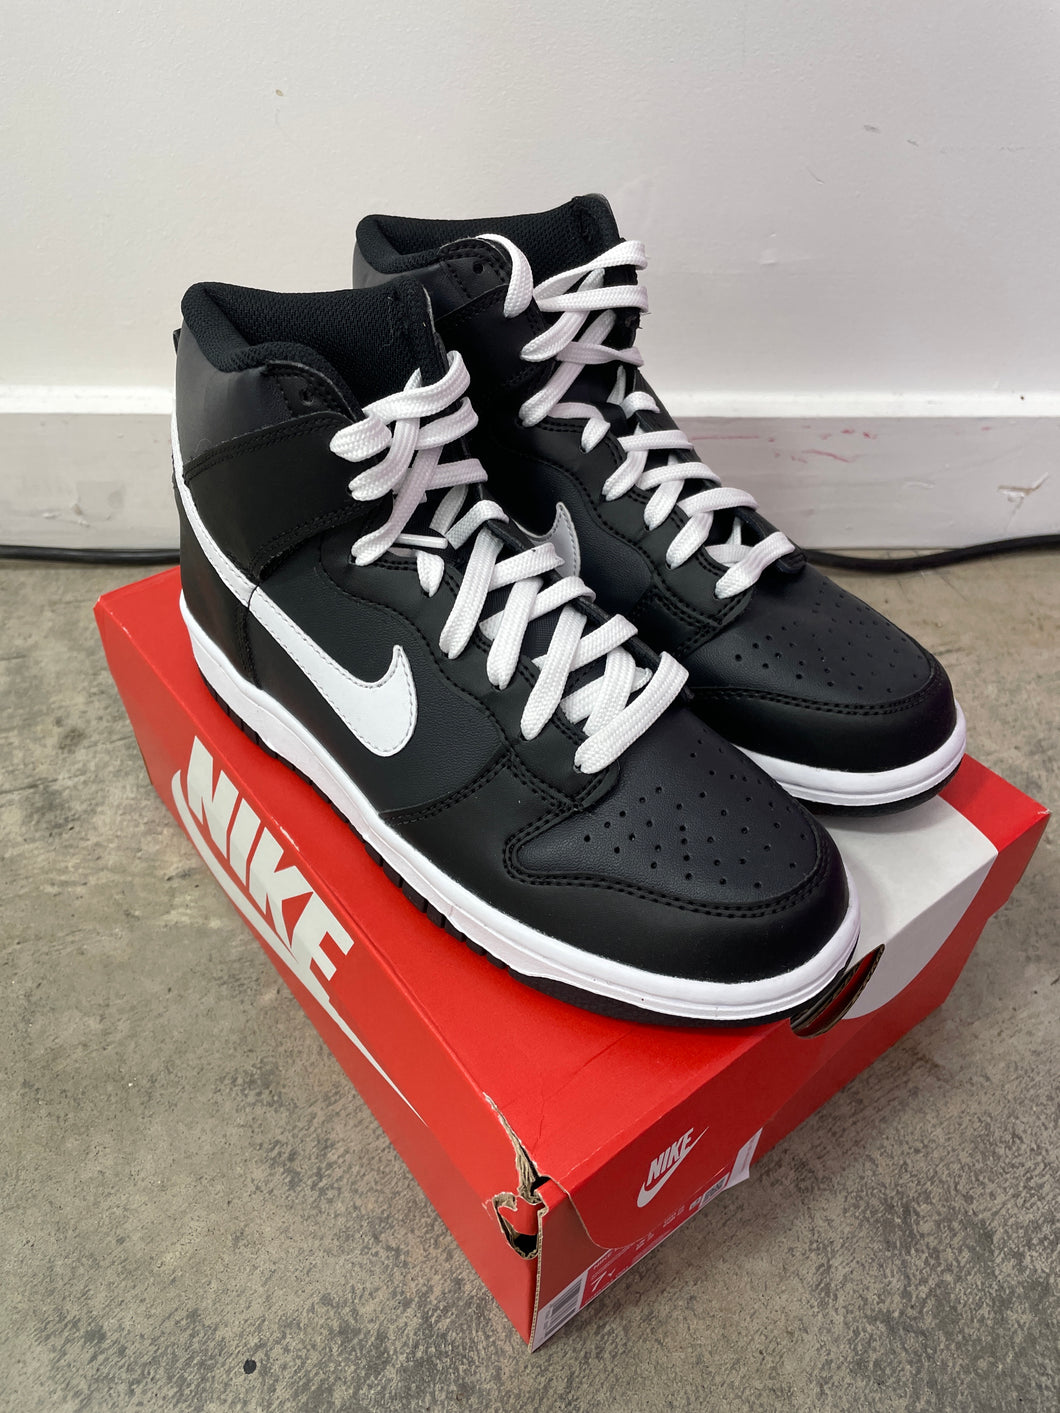 Nike Dunk High Anthracite White Sz 7Y (GS)